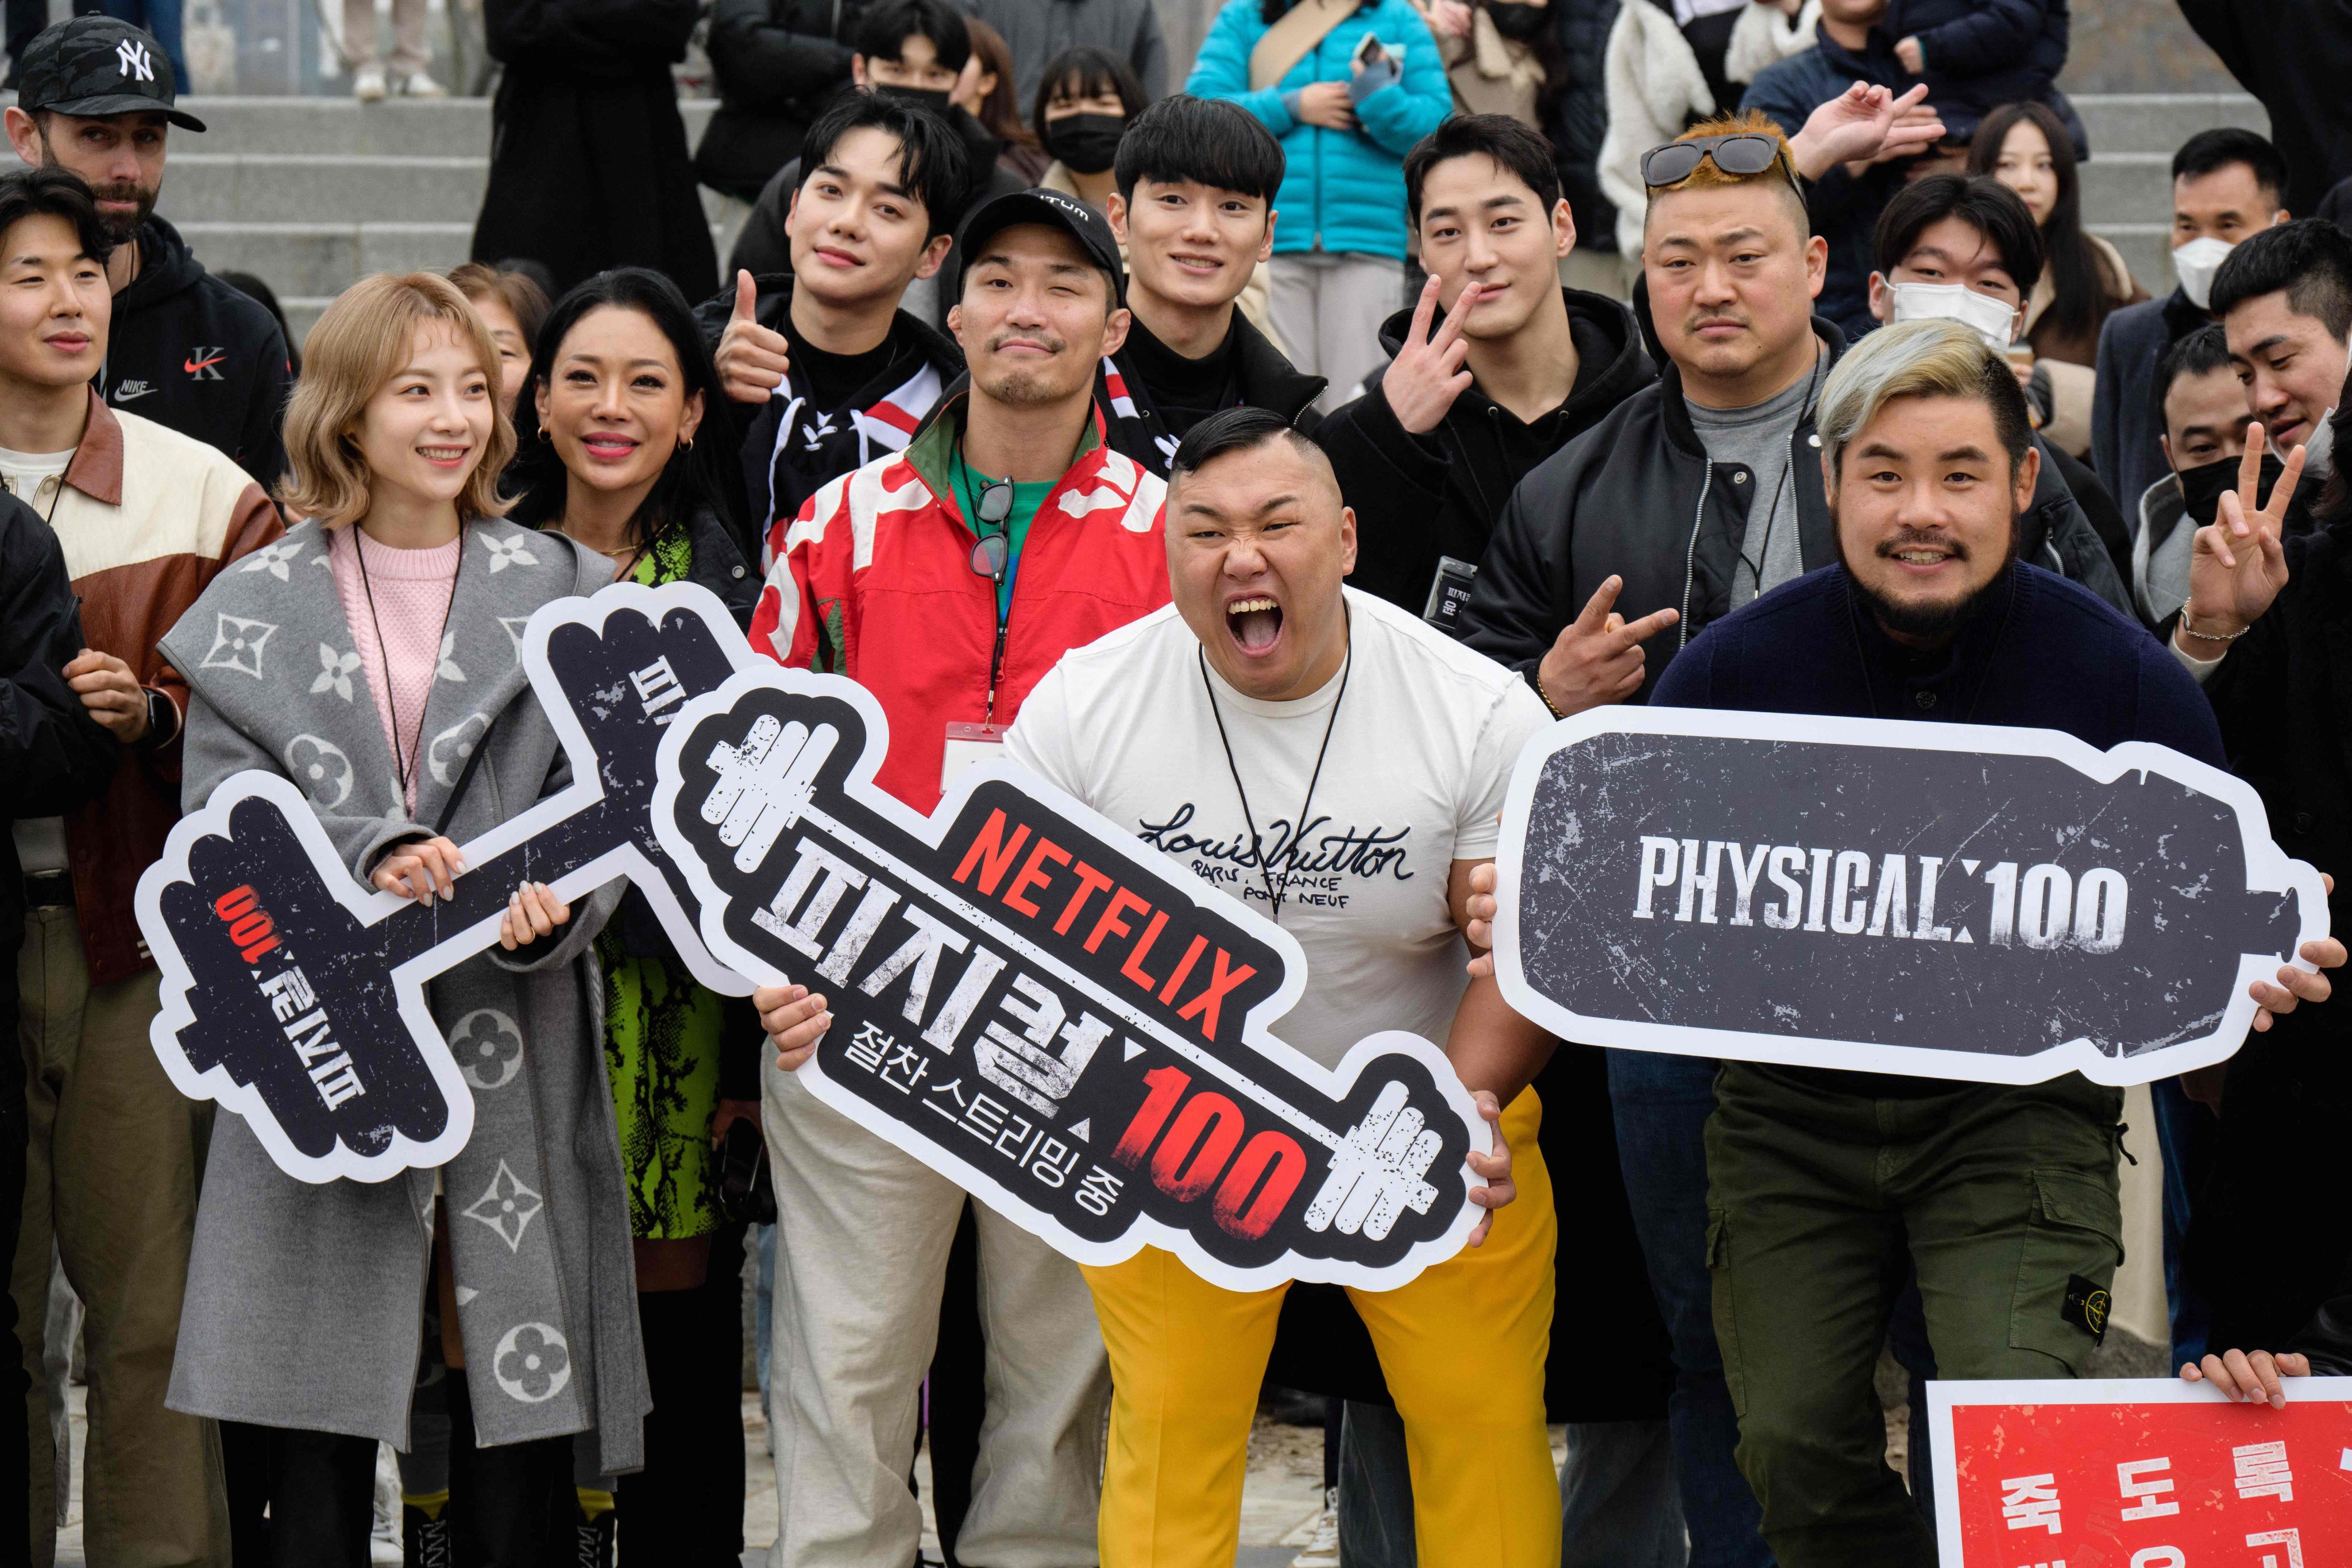 Physical: 100 cast: Who's in the Korean reality competition series?